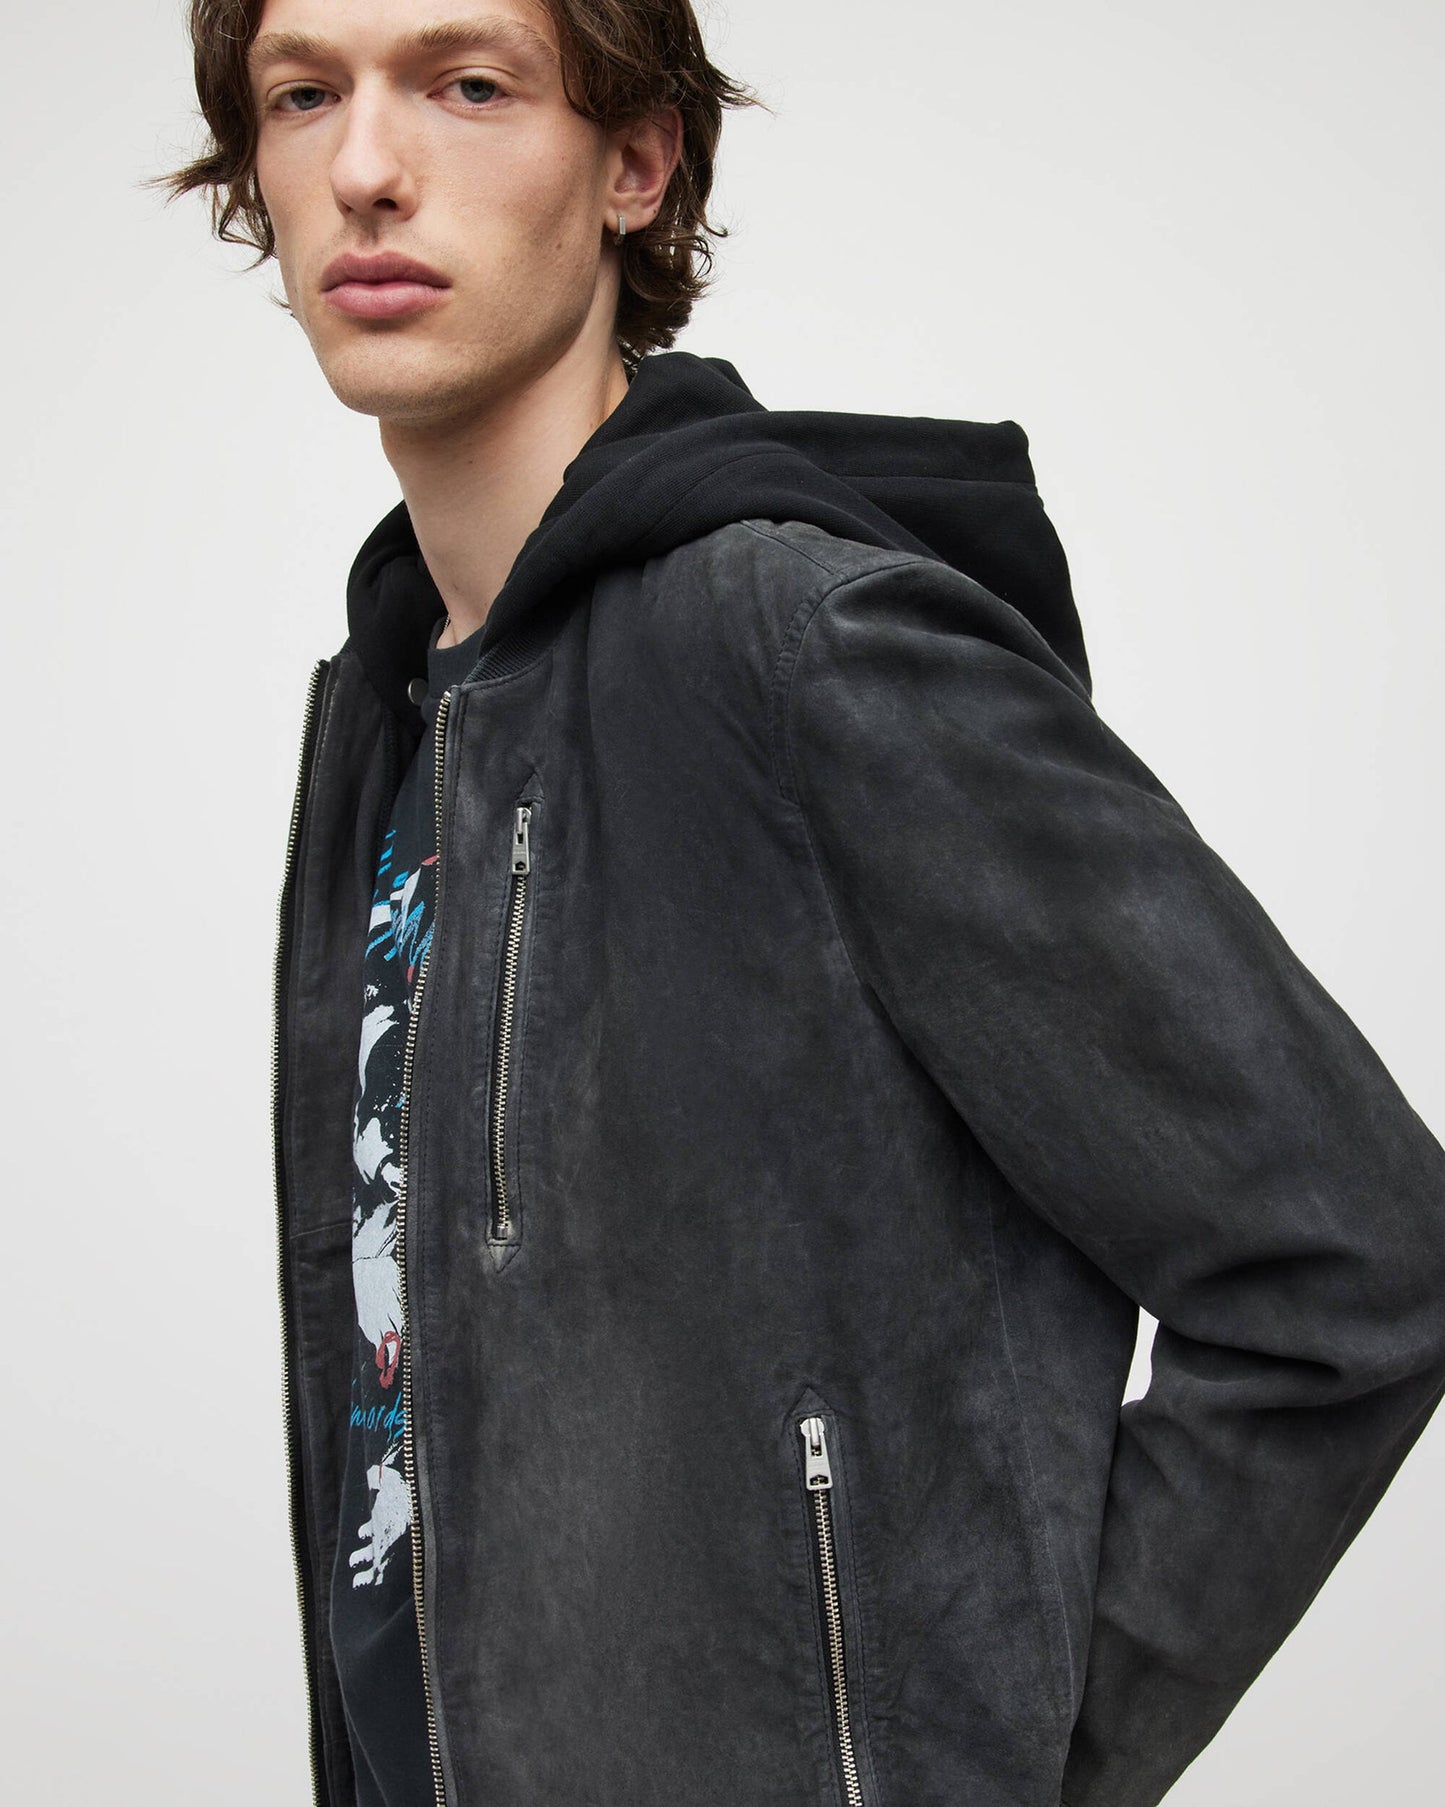 Men's Suede Leather Bomber Jacket In Black With Removable Hood